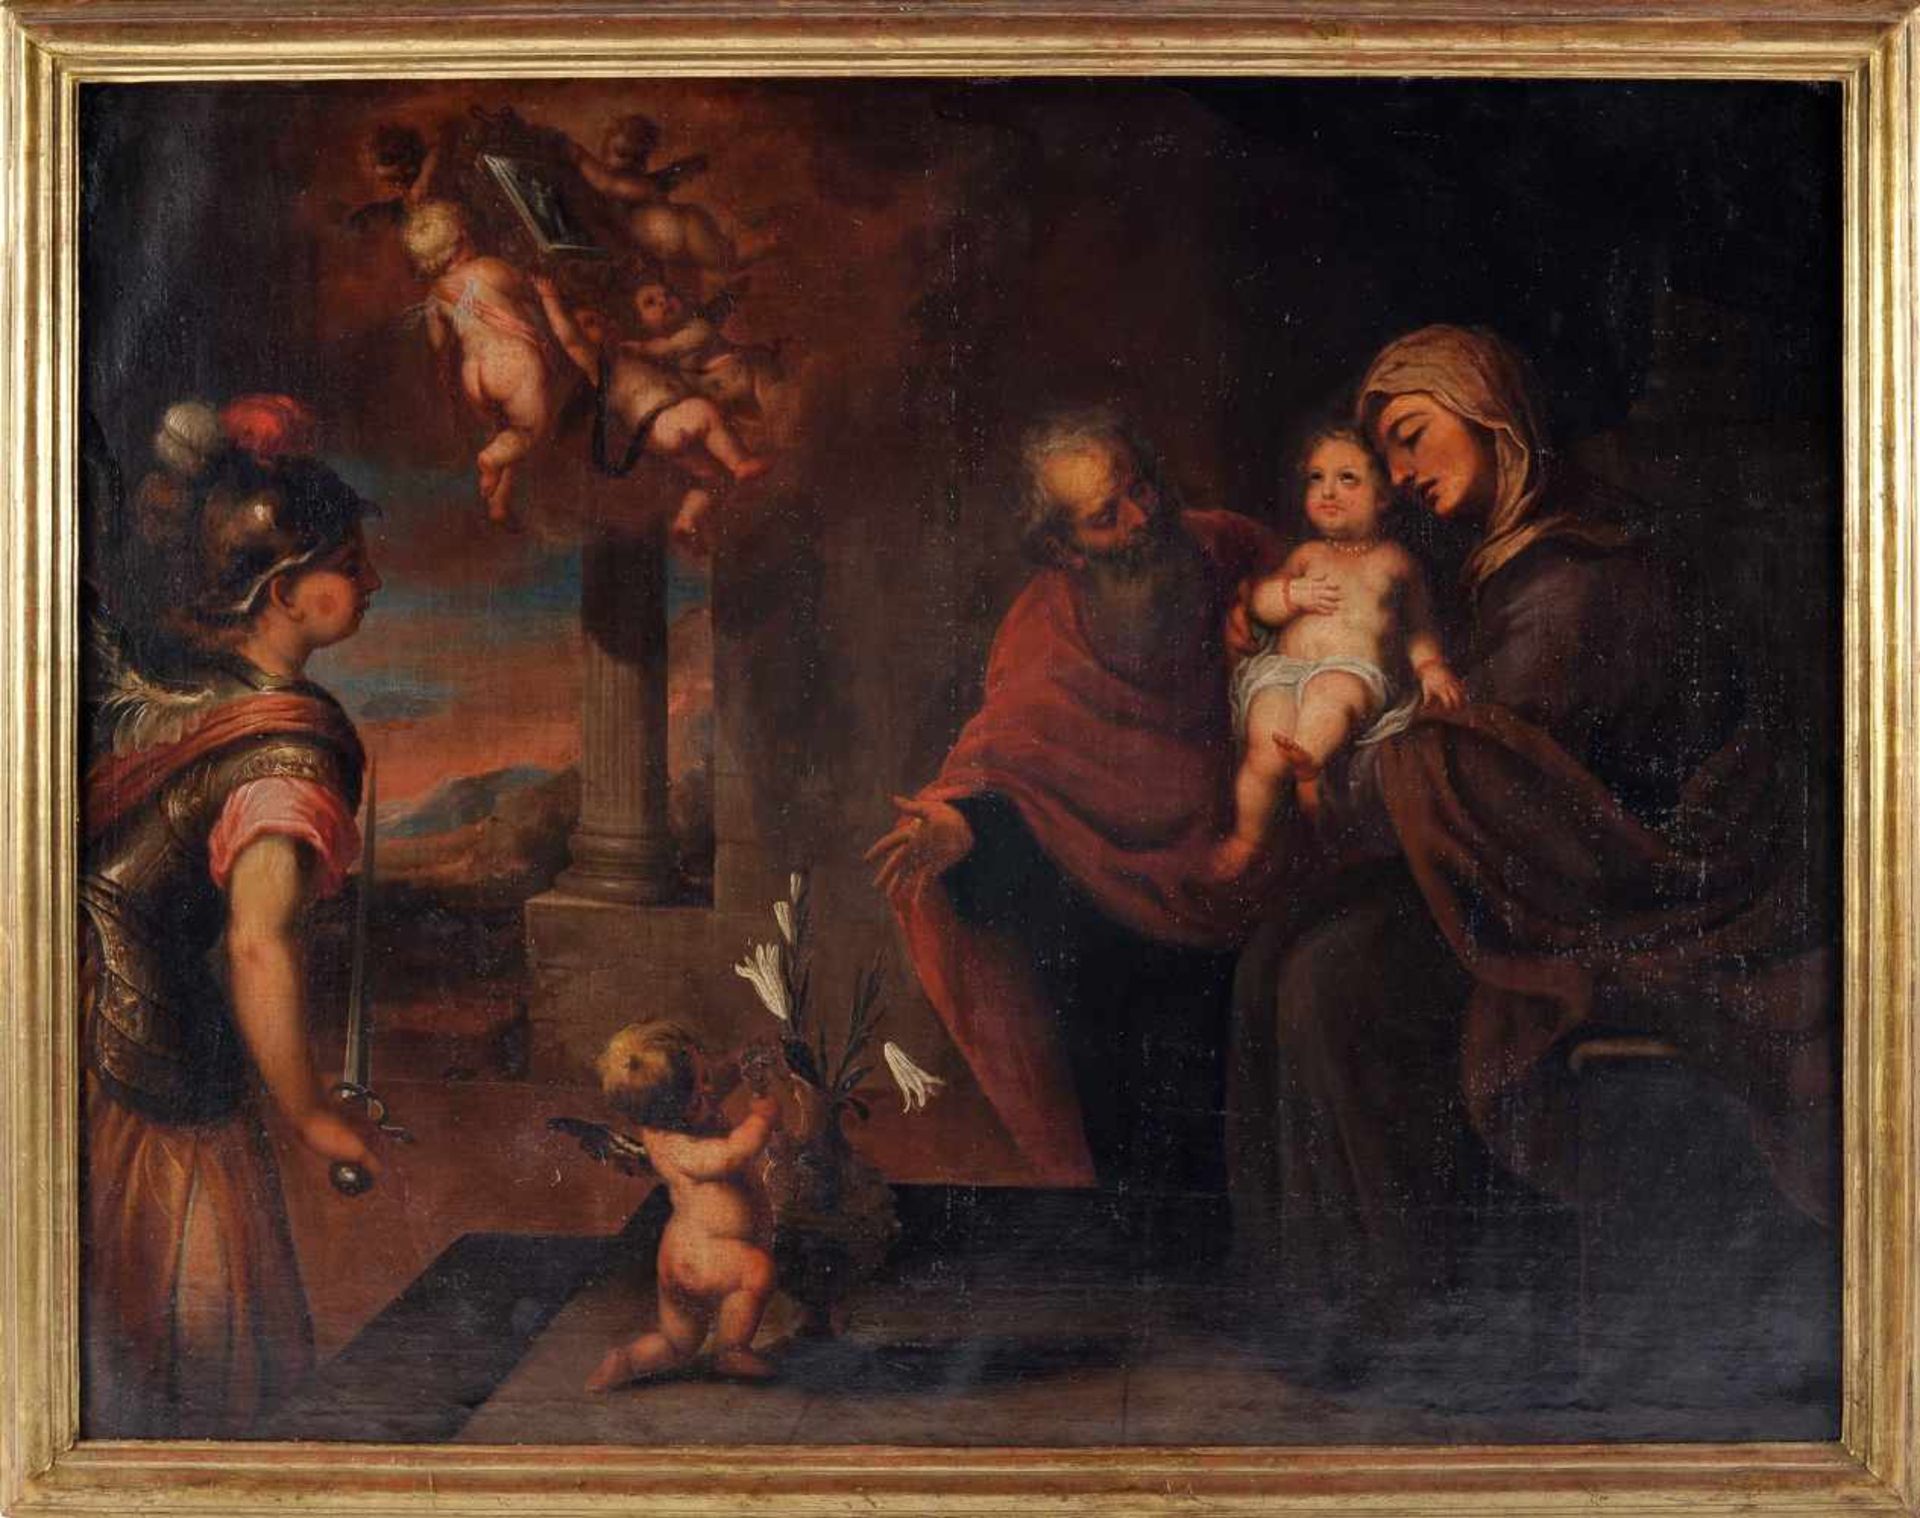 The Holy Family, Archangel and Angels showing a painting